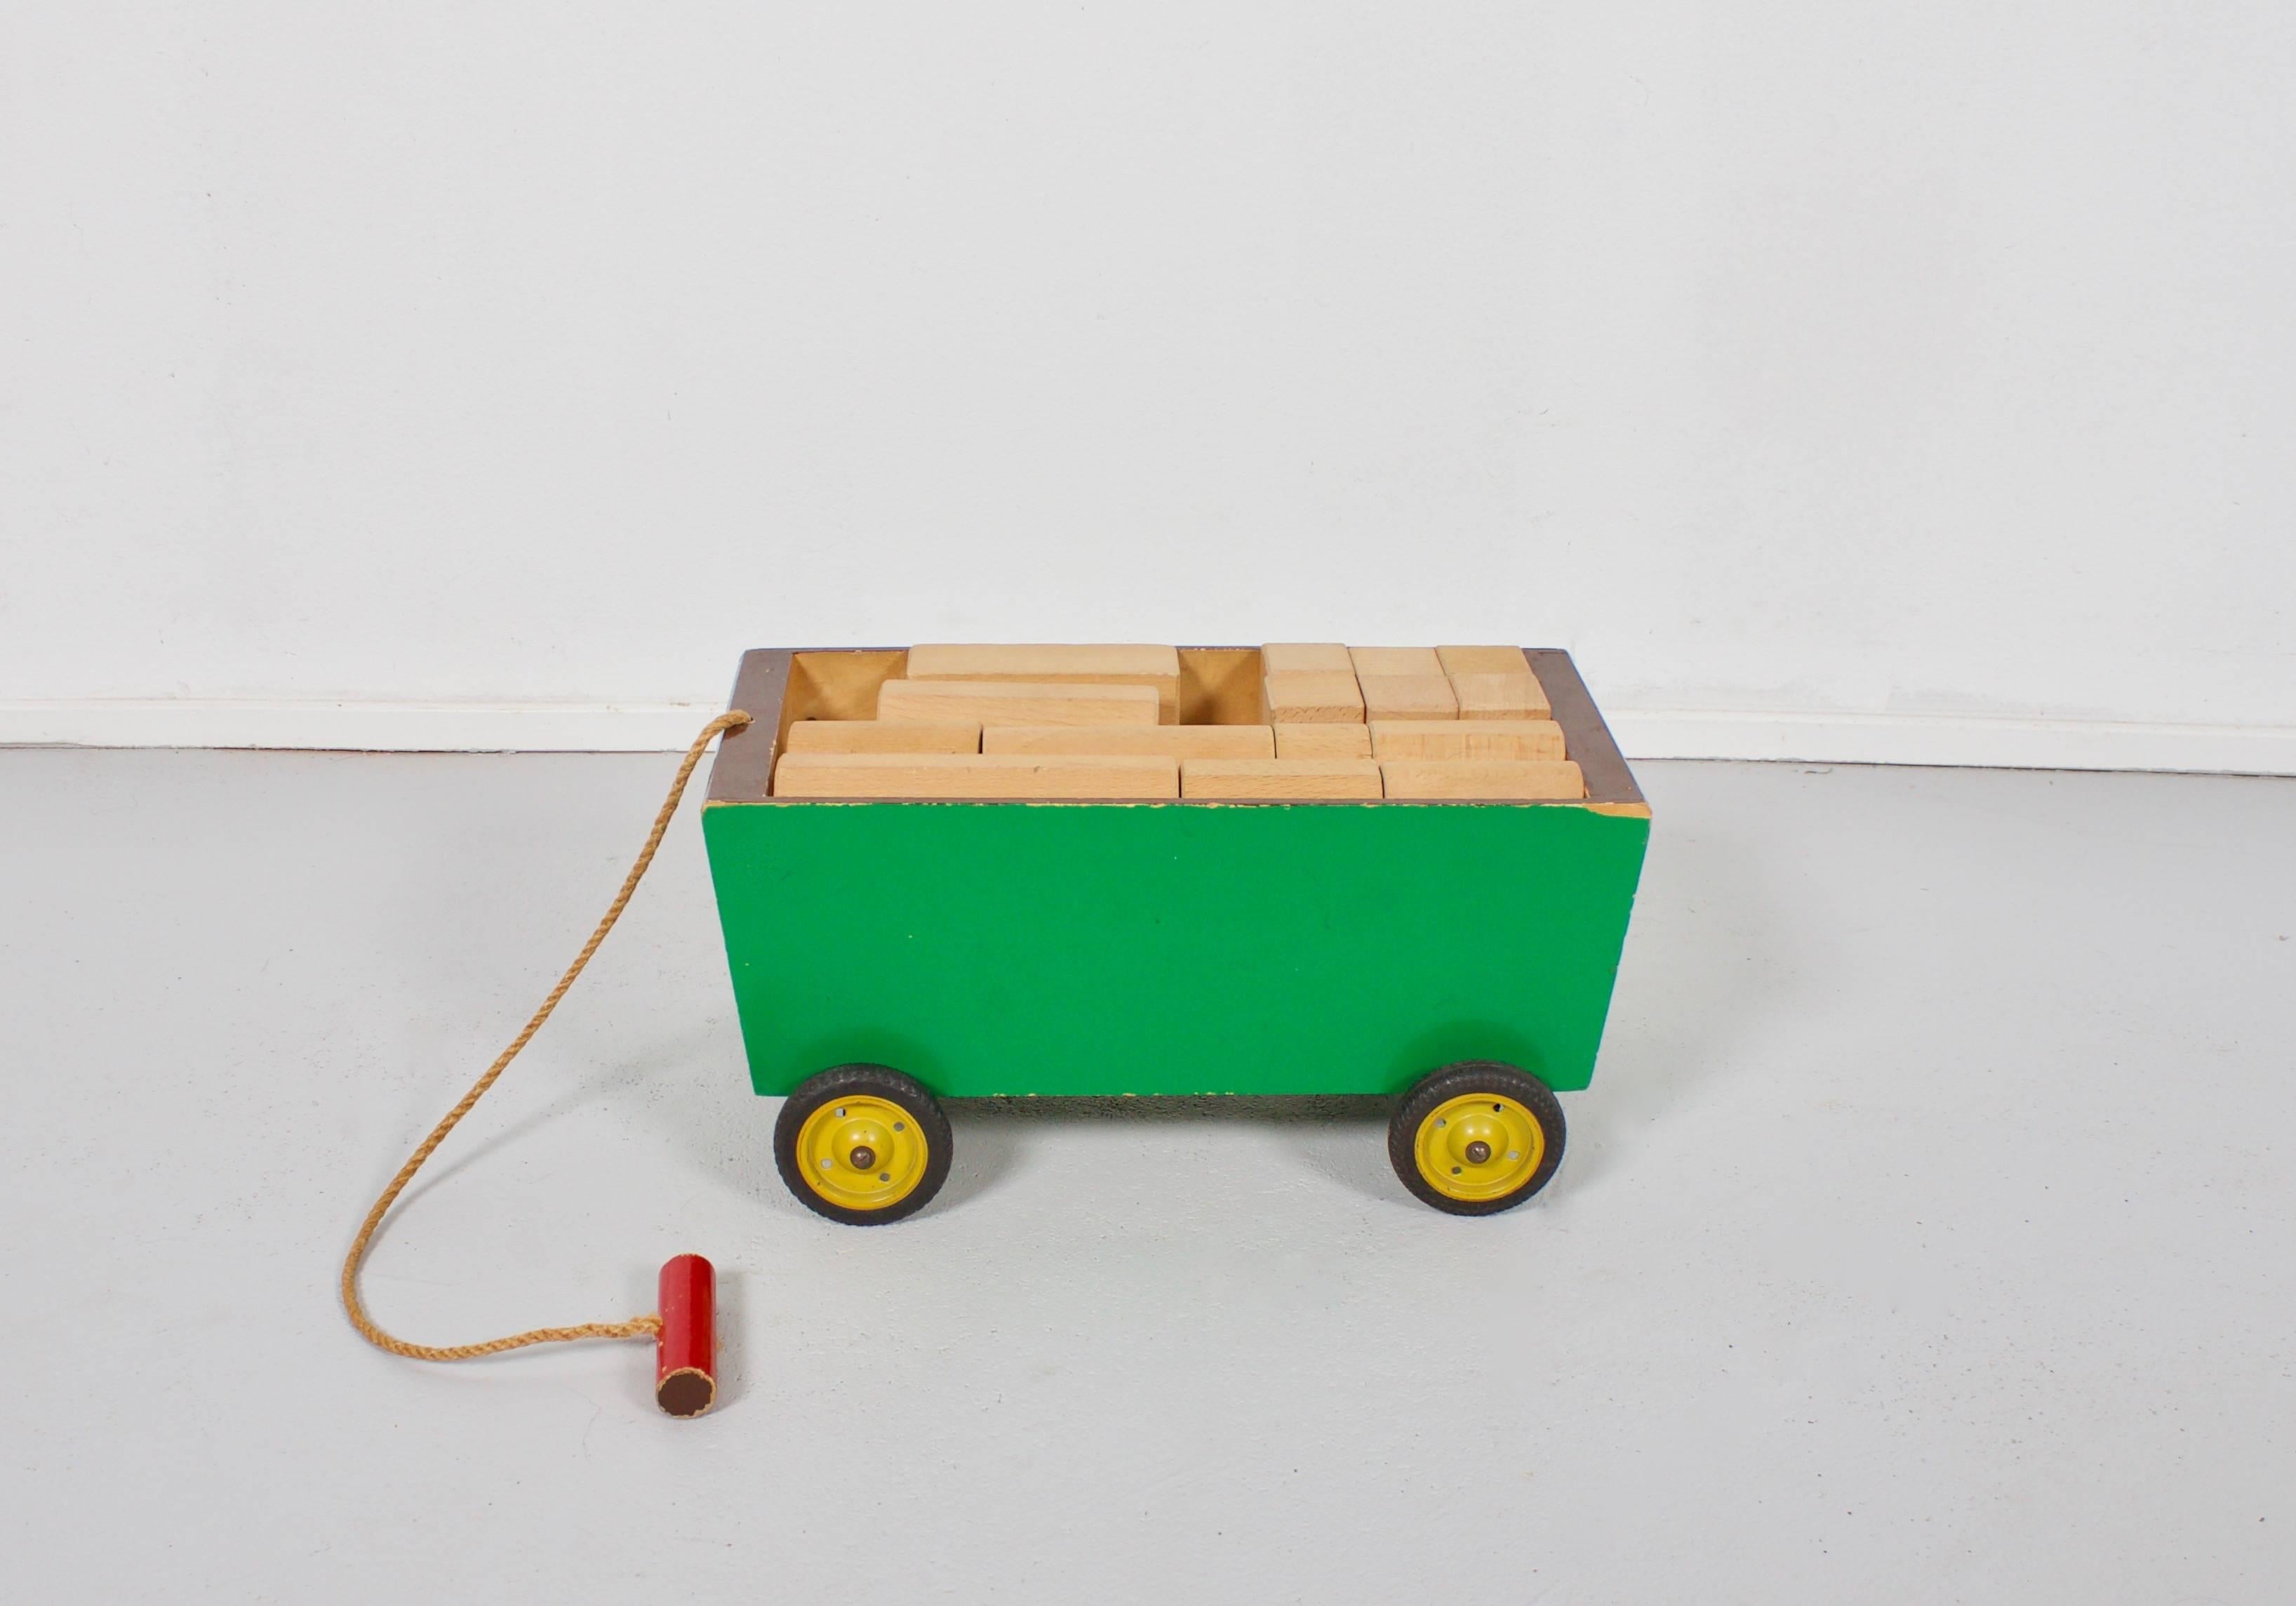 Wooden Ko Verzuu Toy Cart in beautiful original condition.

Manufactured by Ado Holland (Arbeid door onvolwaardigen) founded in 1925.

This Cart stil has the original paint, wheels and rubber tires.
It can be pulled by a rope with a wooden